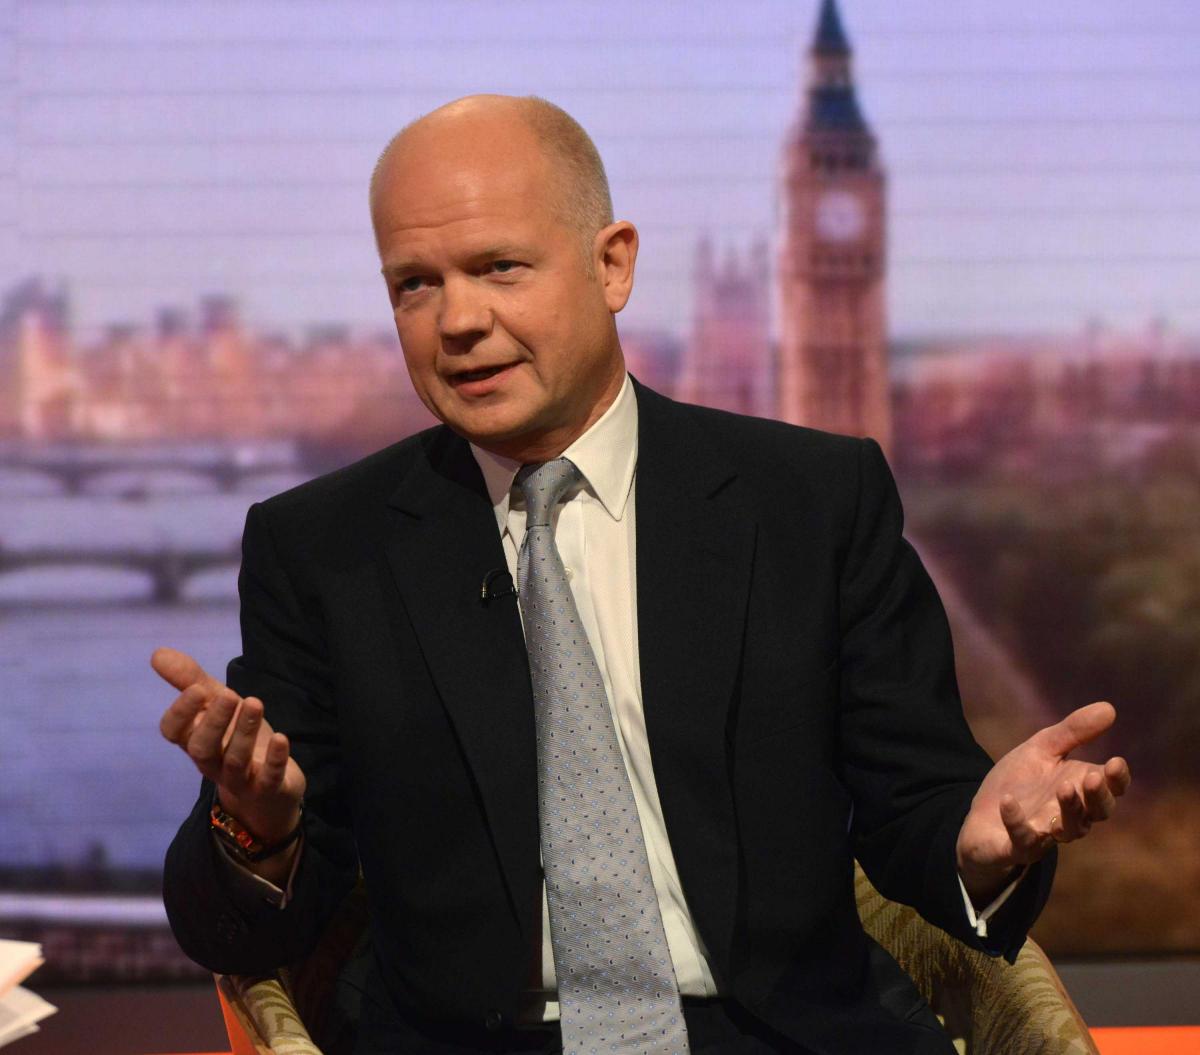 William Hague appearing on the BBC1 current affairs programme, The Andrew Marr Show in 2013